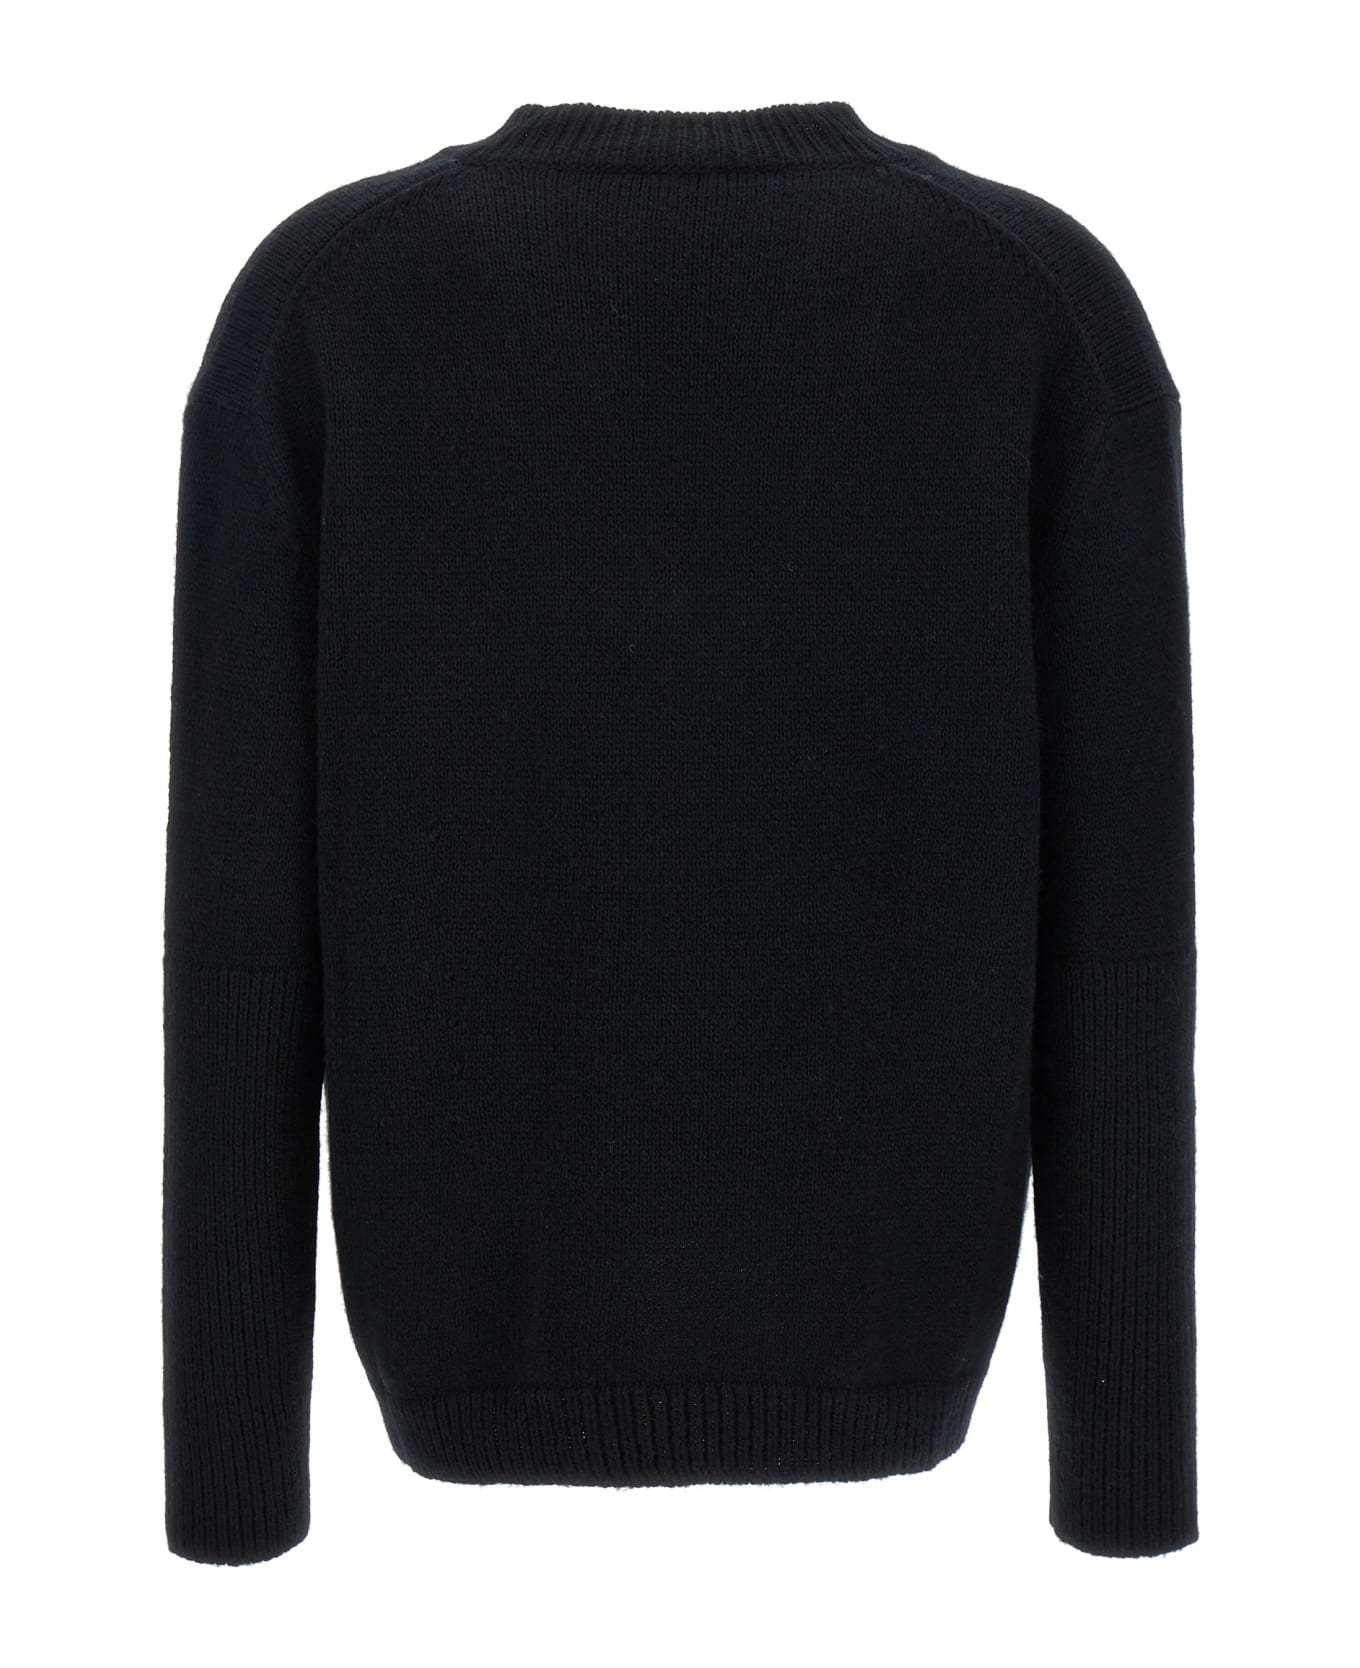 Tom Ford Mixed Cachemire Sweater - Black